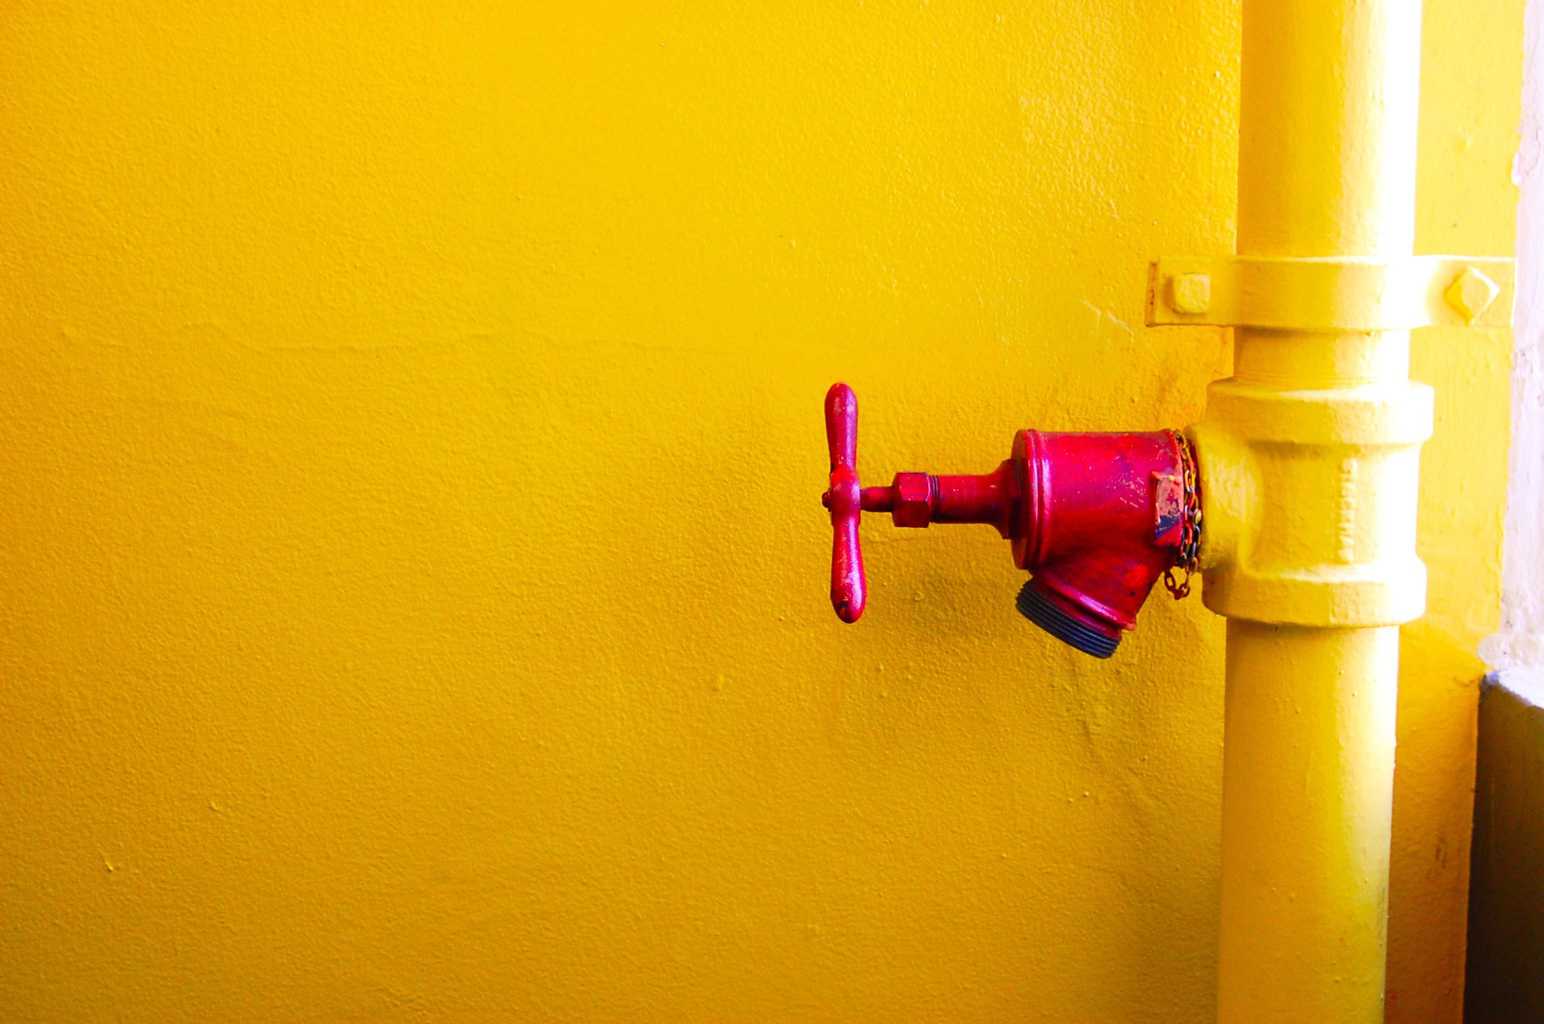 A wter shut off valve with yellow background